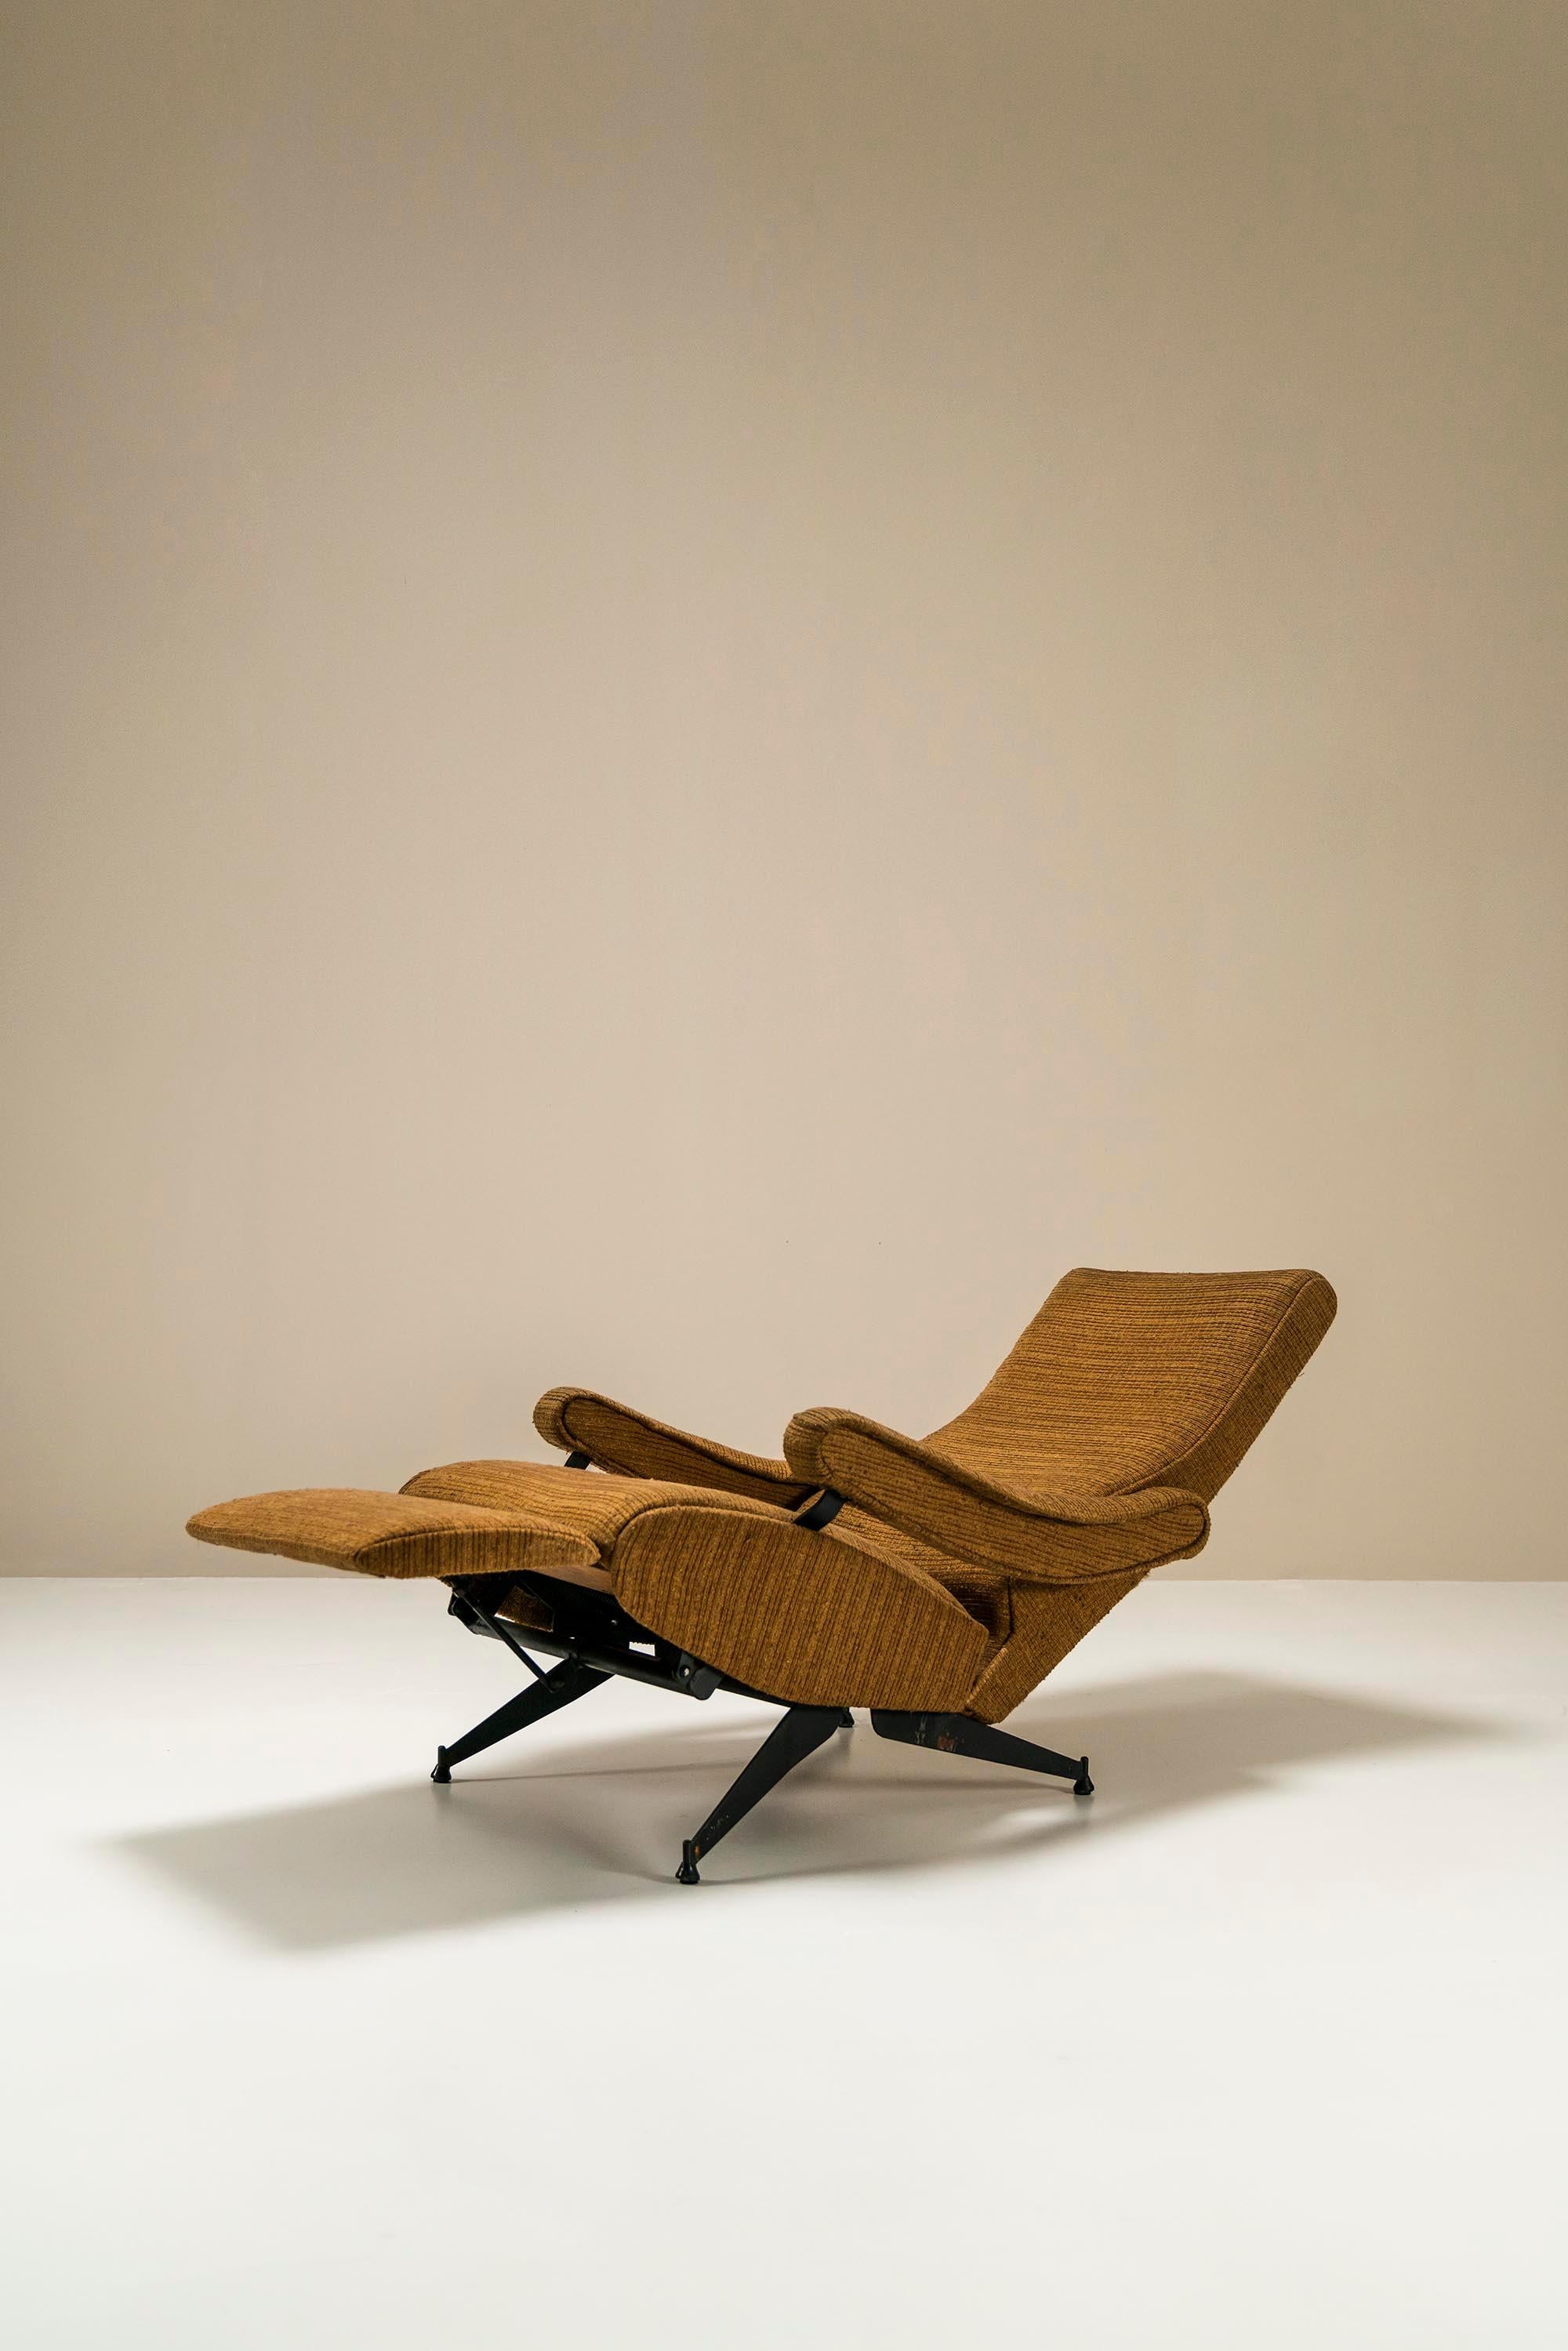 Reclining Armchair in Steel and Fabric by Nello Pini for Novarredo, Italy, 1959 For Sale 5